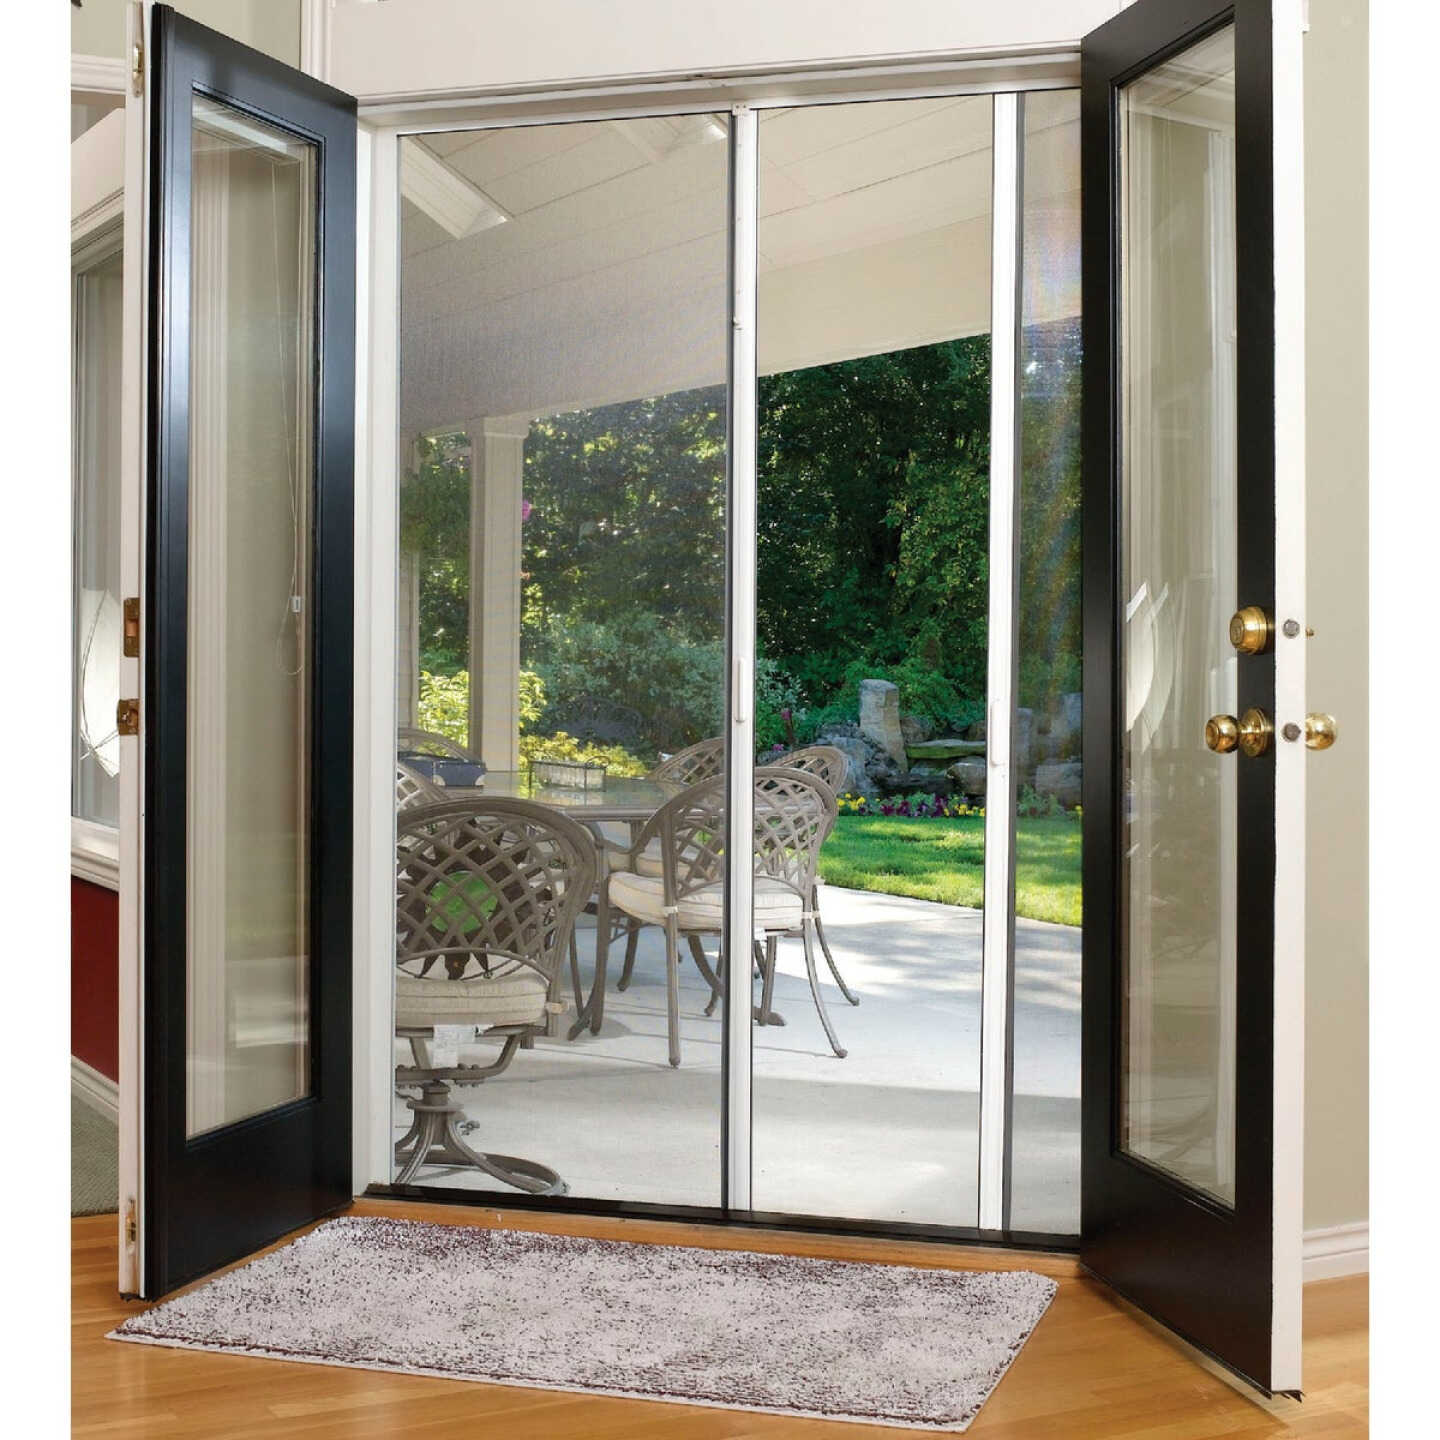 Exterior French Doors: Read This Guide Before You Buy - This Old House